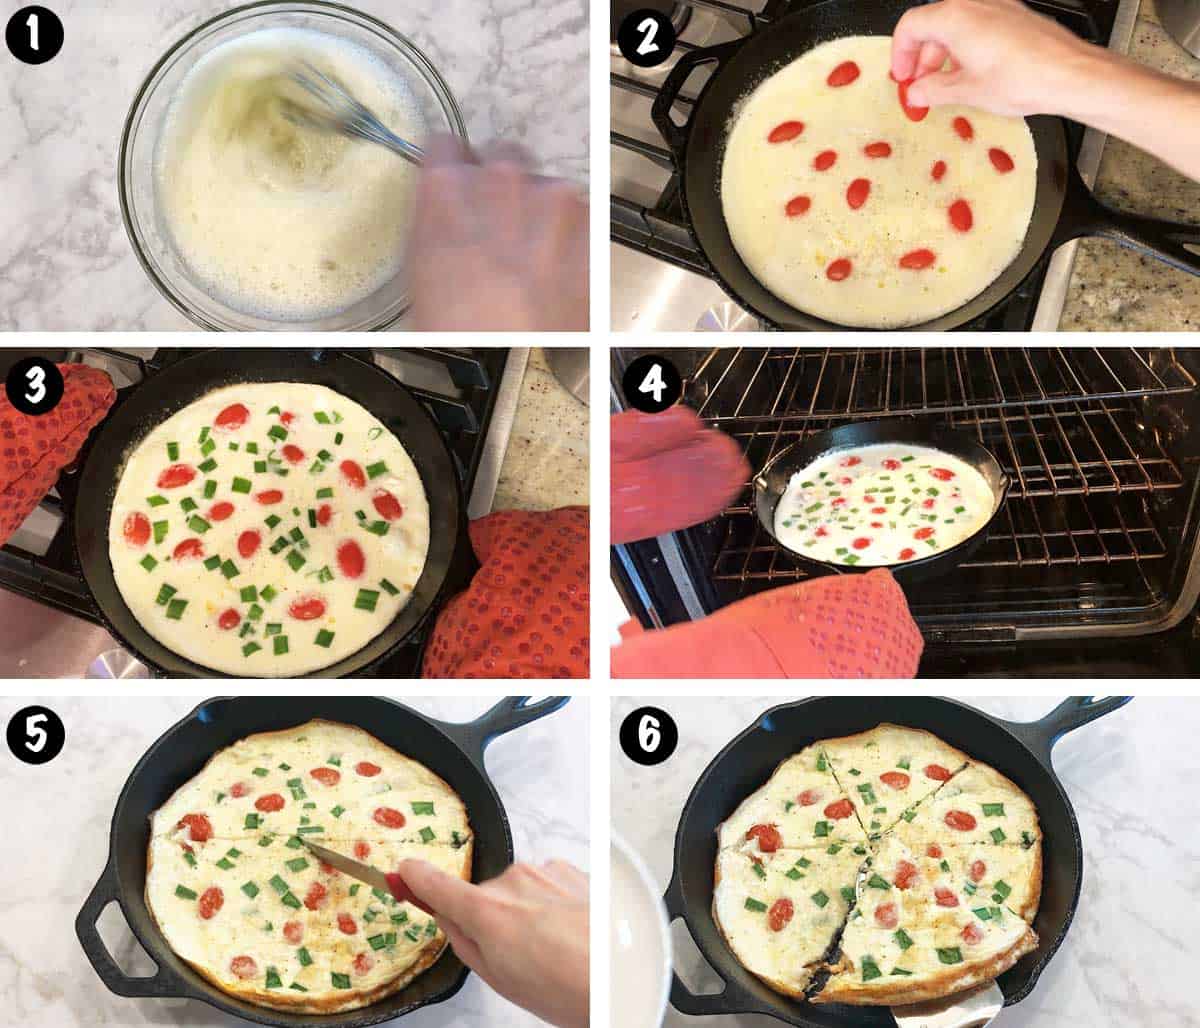 A photo collage showing the steps for making an egg white frittata. 